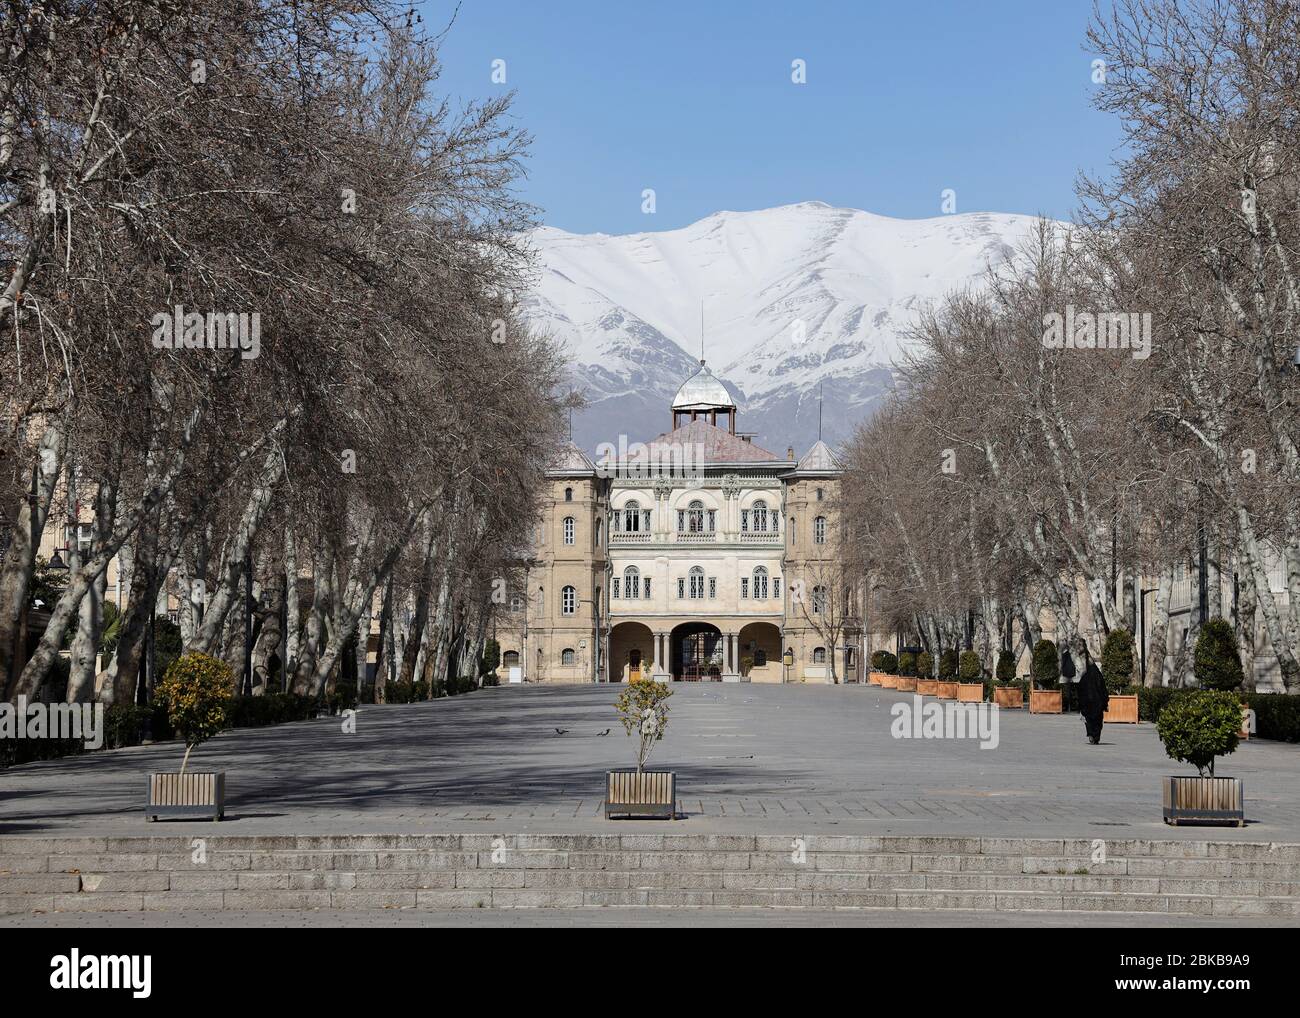 Bagh-e Melli (National Garden) with Tehran University of Art buidling and snow capped Mount Alborz, Teheran, Iran, Persia, Middle East. Stock Photo